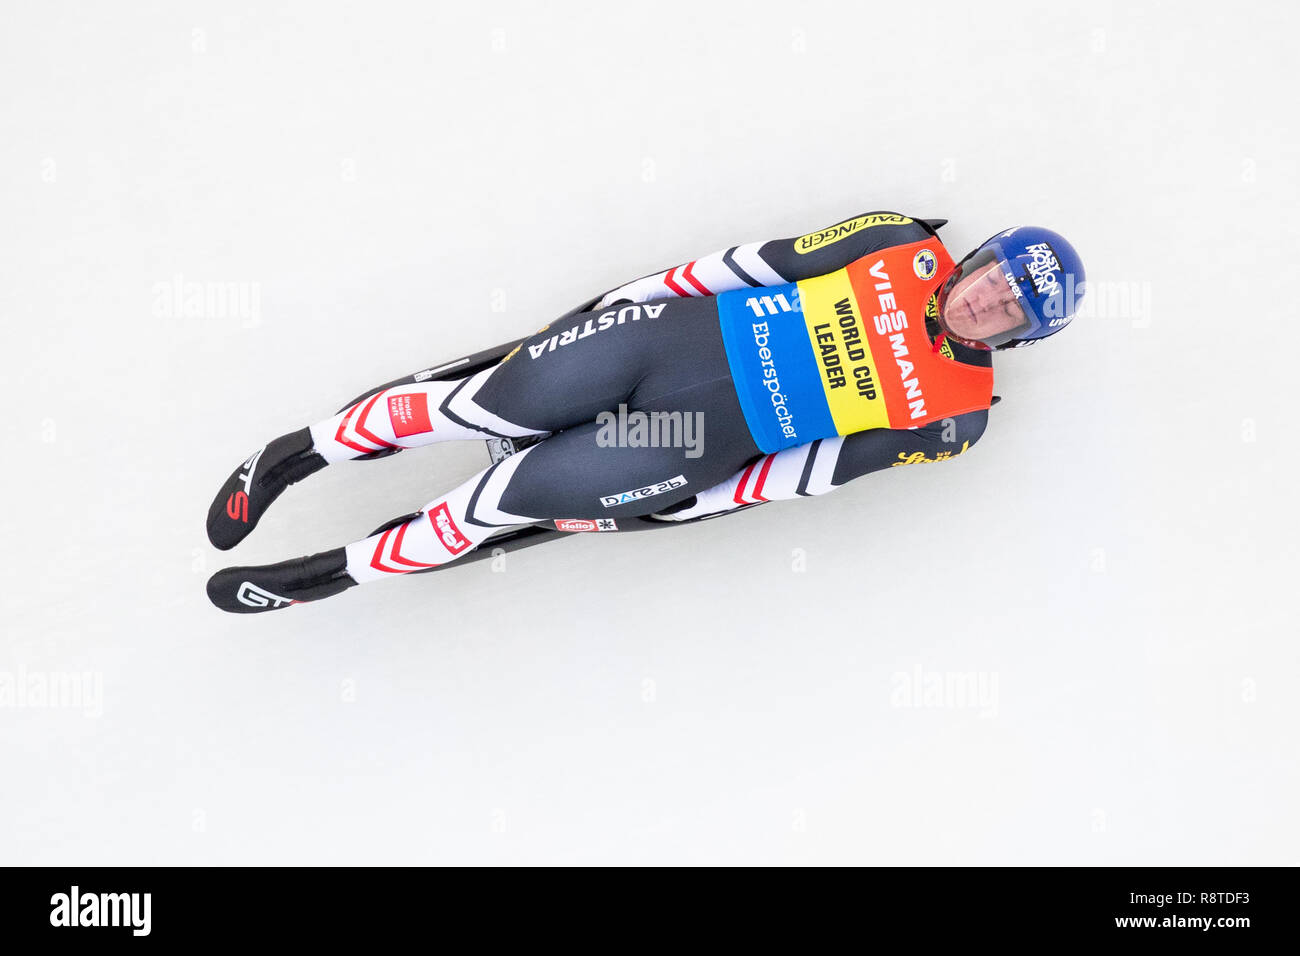 Wolfgang Kinda of Austria during World Cup Luge event at Mt. Van Hoevenberg on  Saturday, December 15, 2018, in Lake Placid, New York. | usage worldwide Stock Photo